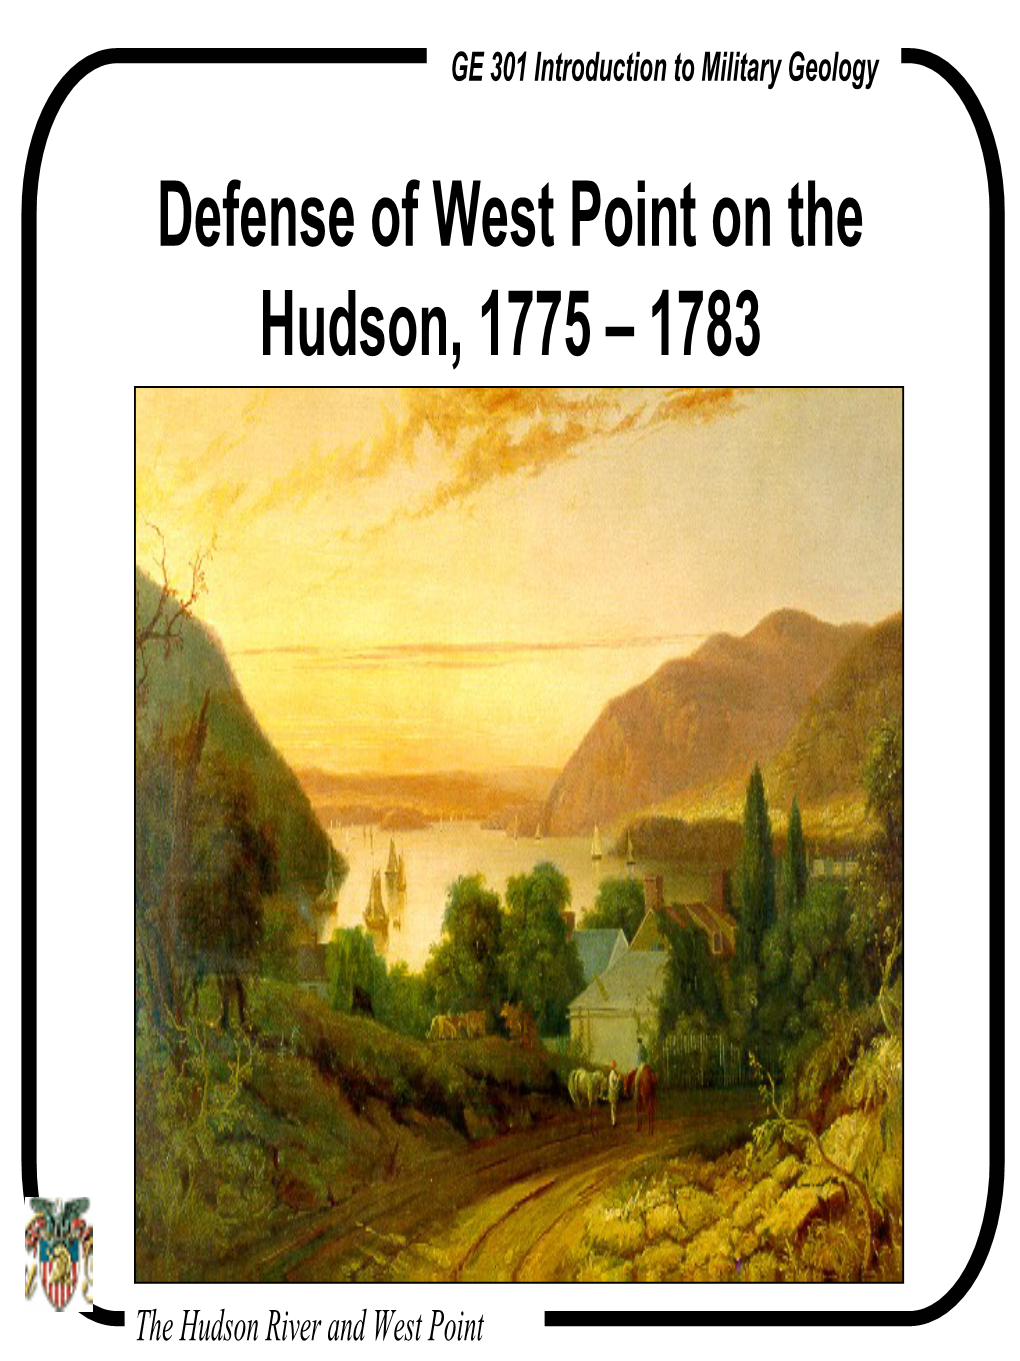 Defense of West Point on the Hudson, 1775 – 1783